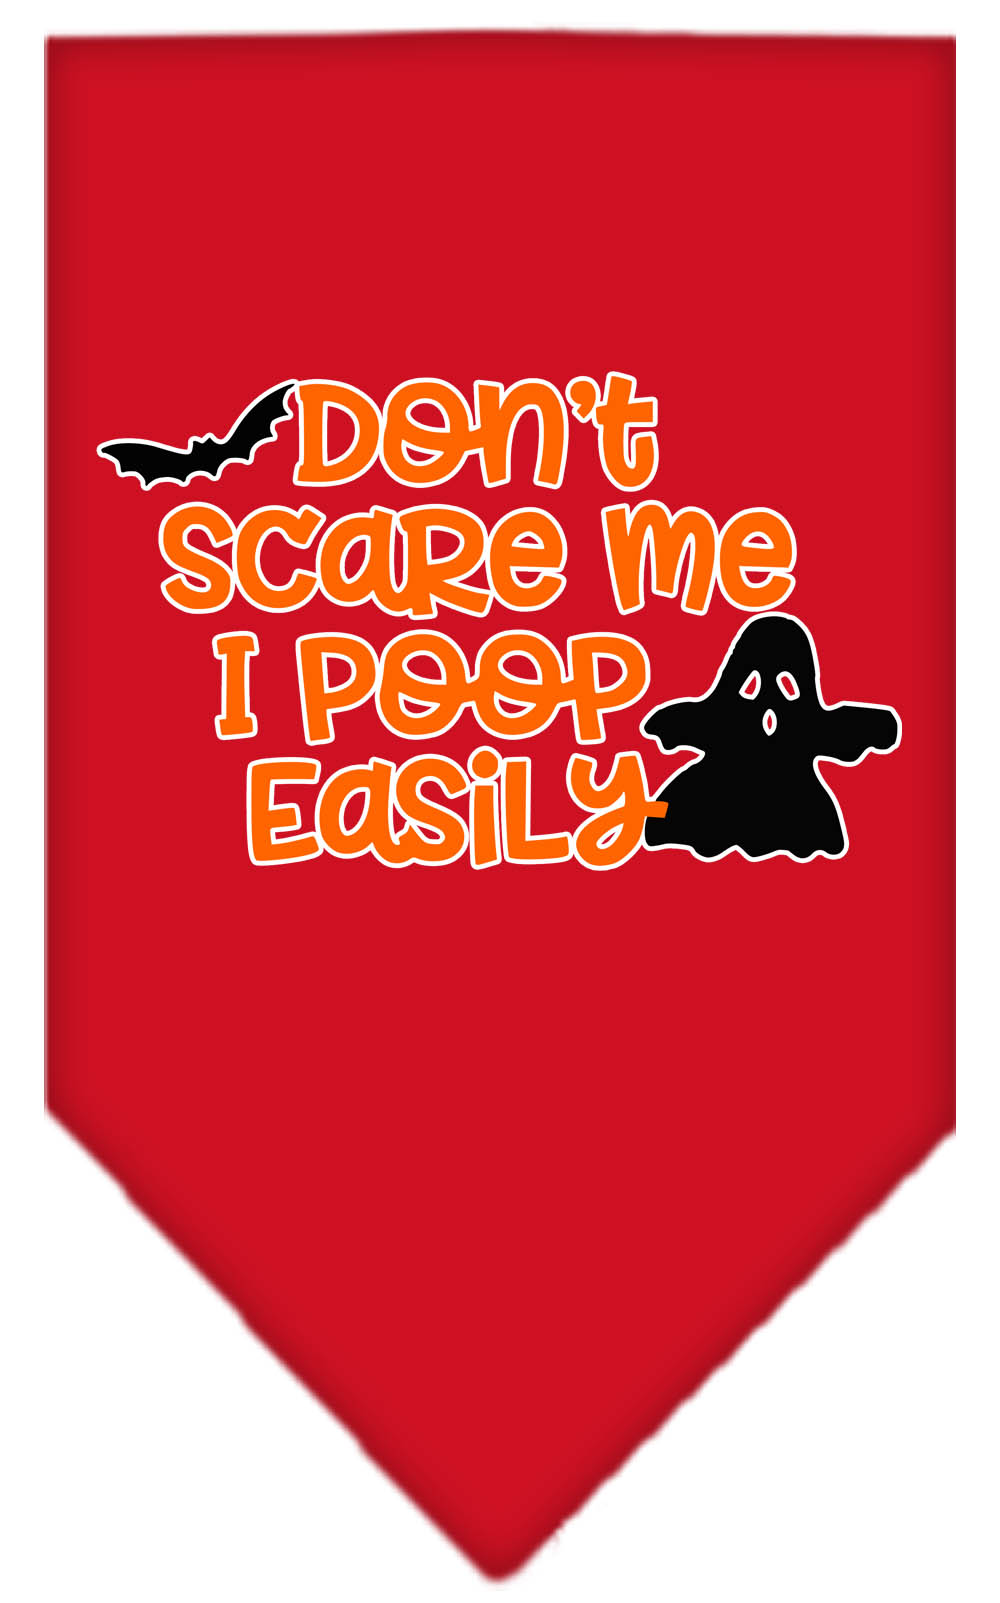 Don't Scare Me, Poops Easily Screen Print Bandana Red Large